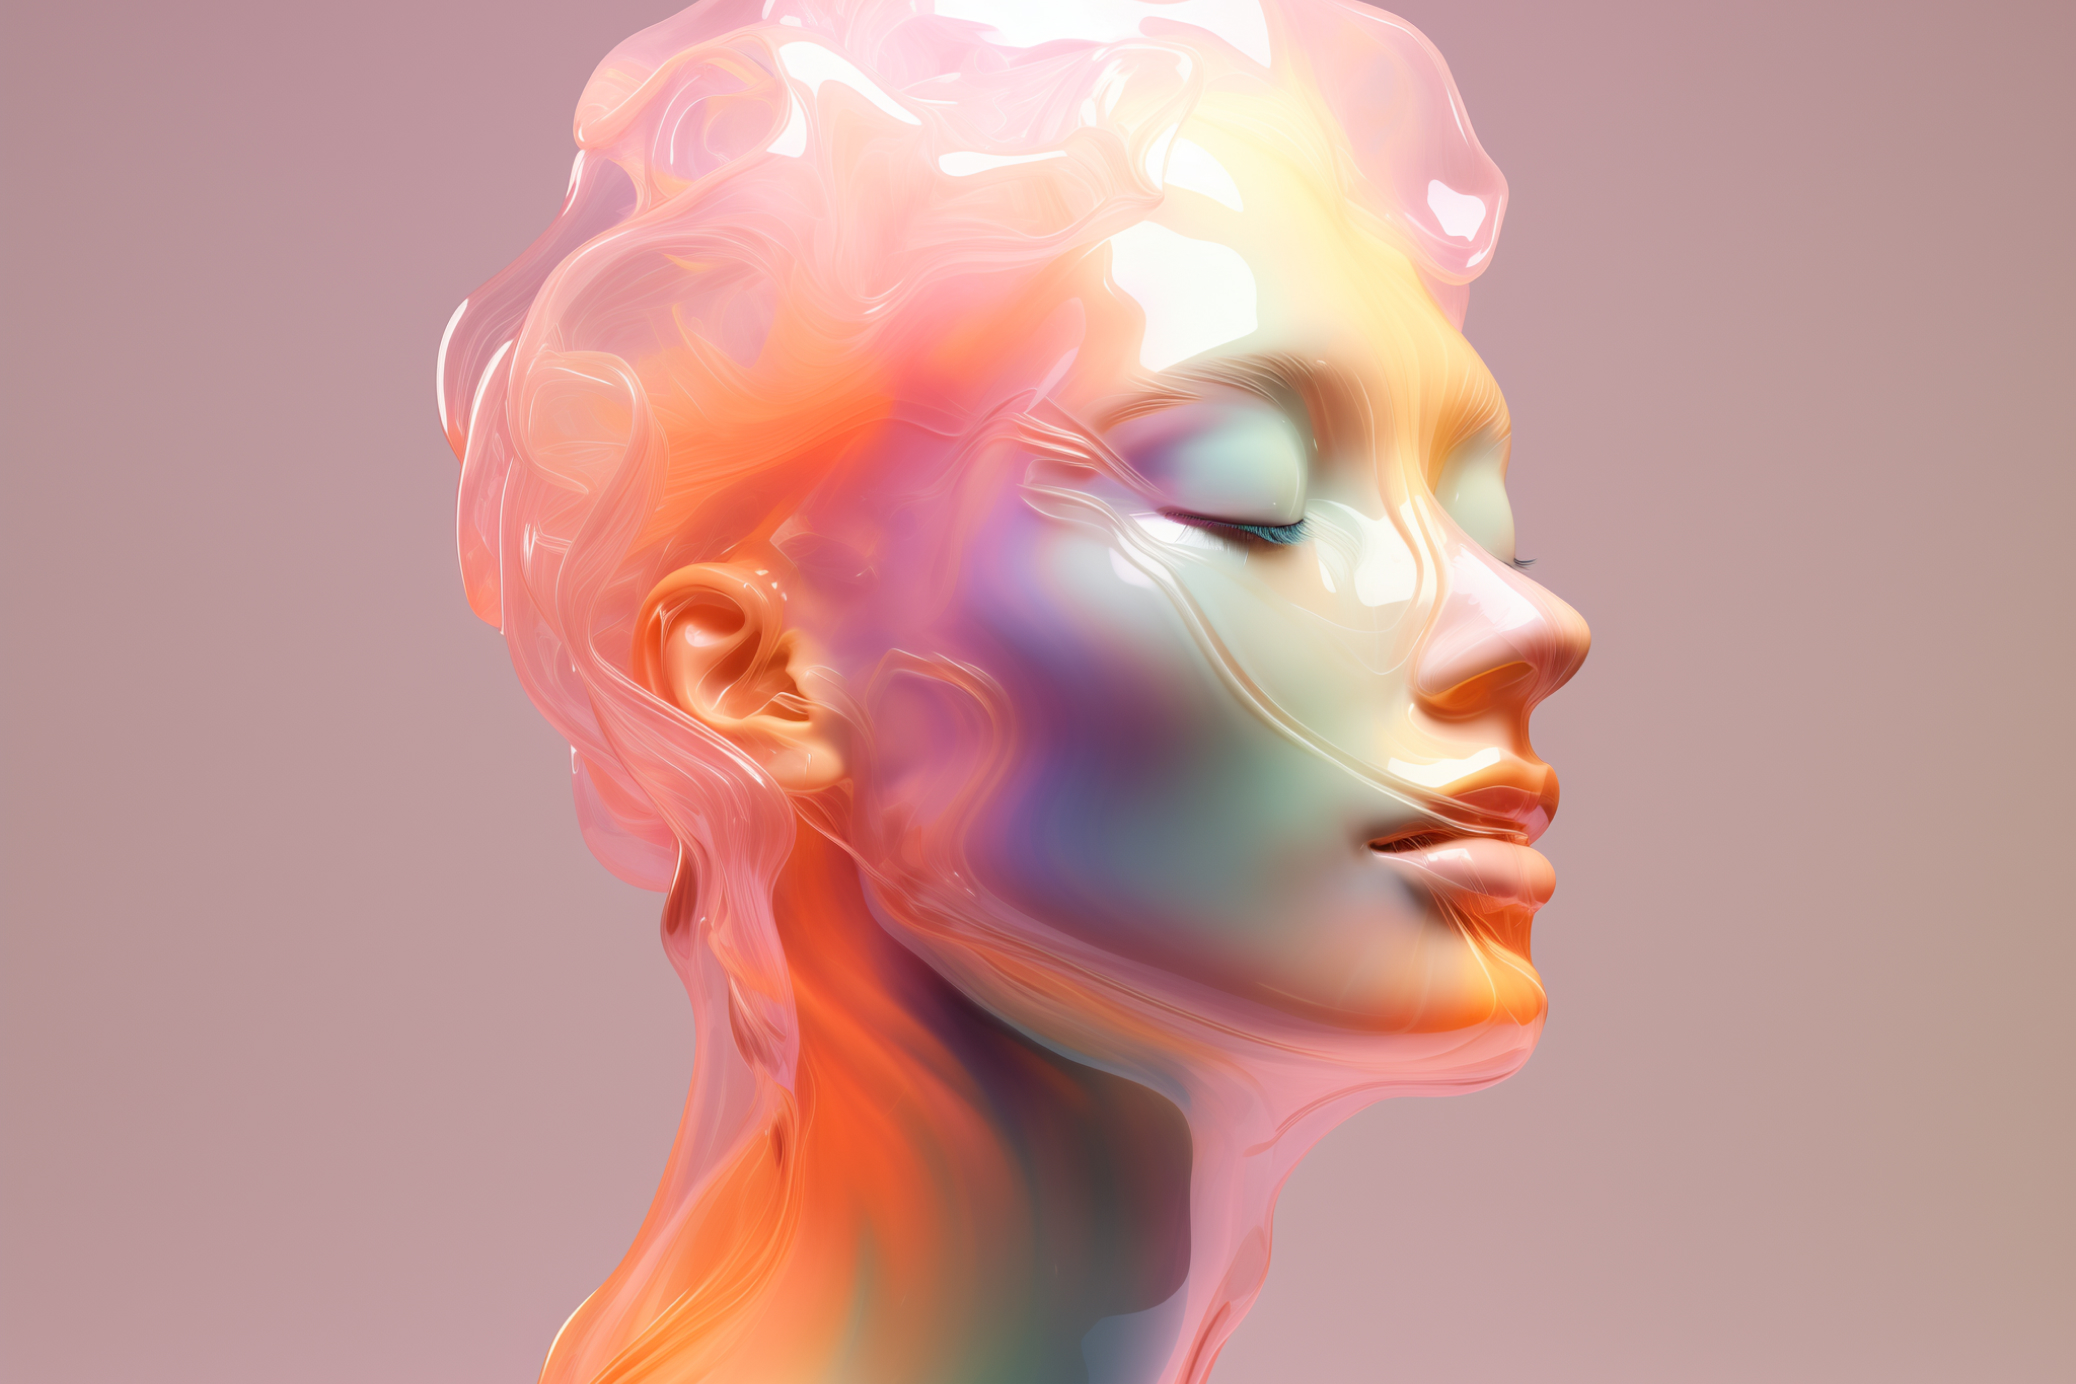 AI-generated 3D render of a humanoid head that fades into an abstract semitransparent shiny veil in shades of light blue and pink